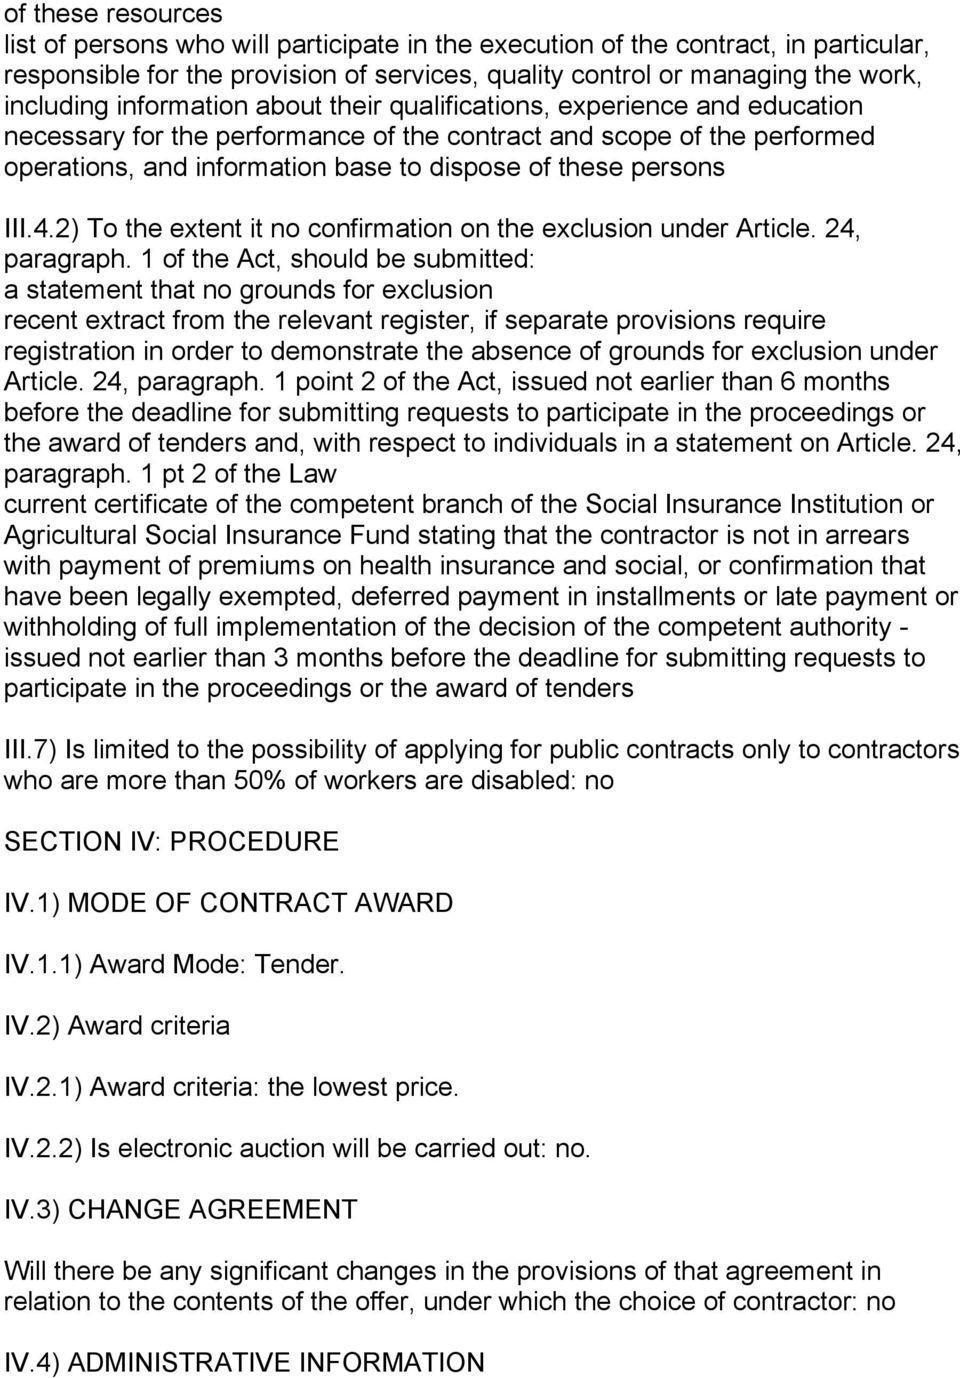 III.4.2) To the extent it no confirmation on the exclusion under Article. 24, paragraph.